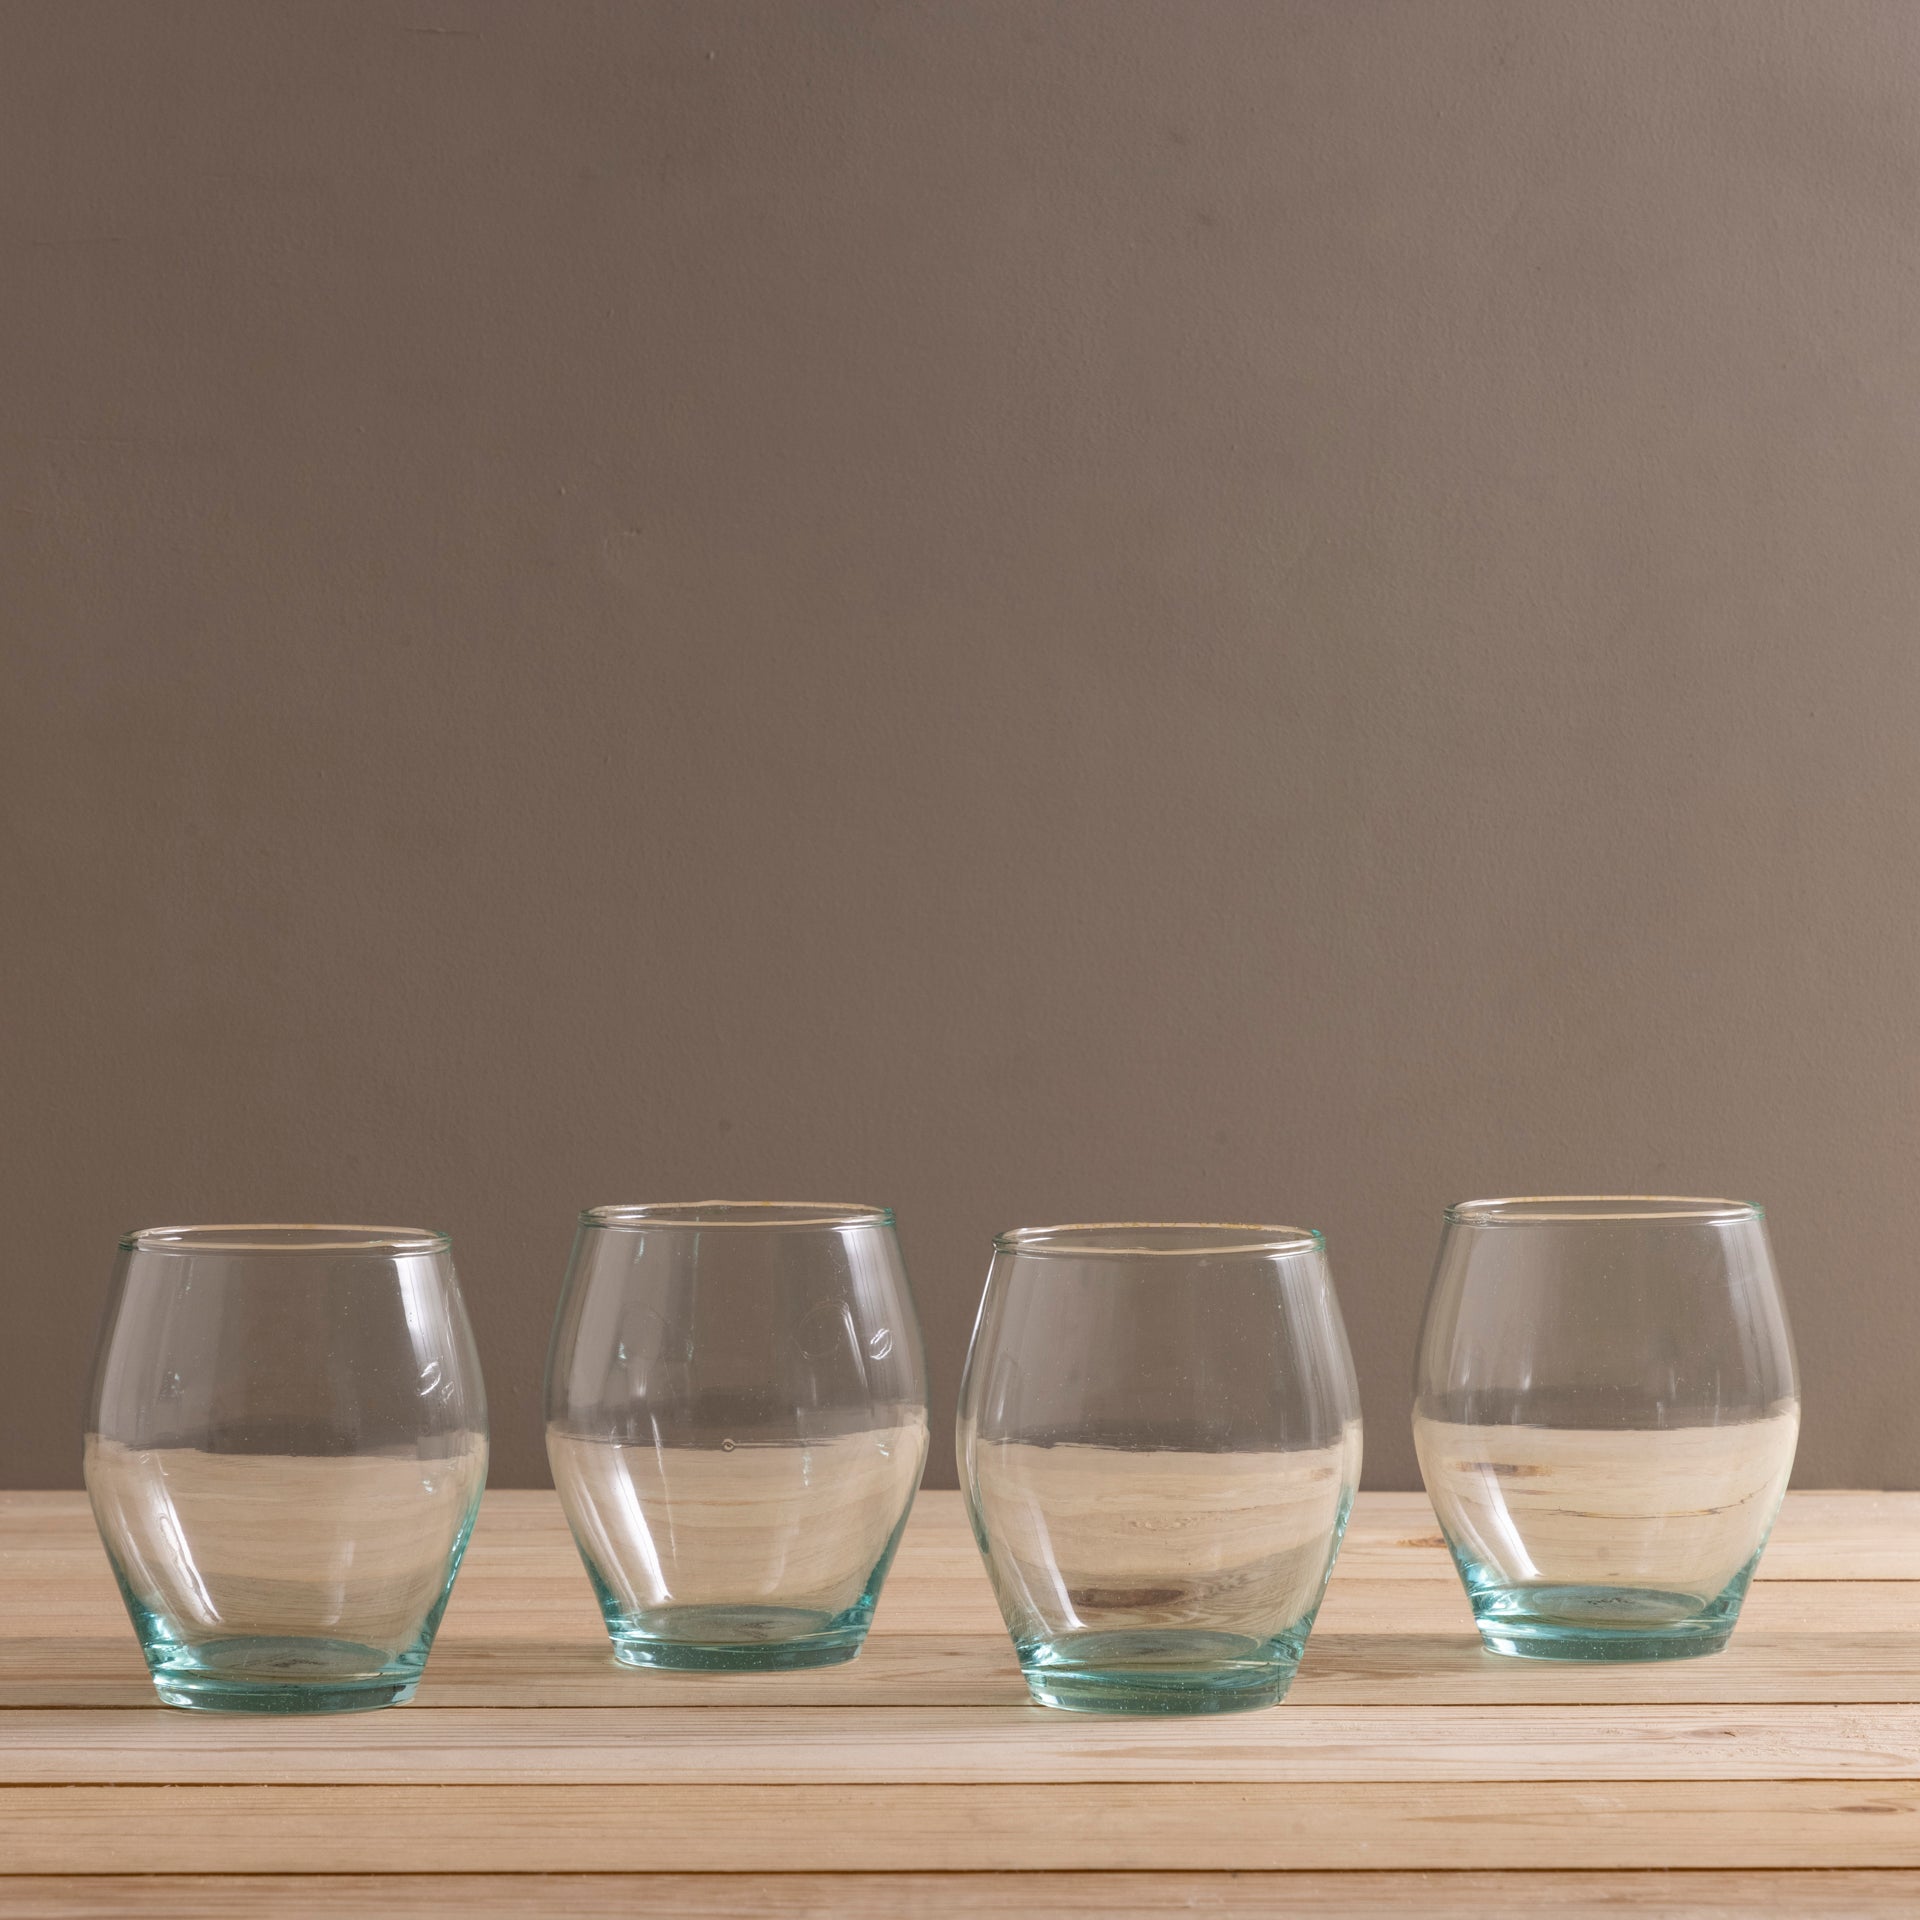 Premium Recycled Stemless Tulip Glass, Set of 4 – Be Home